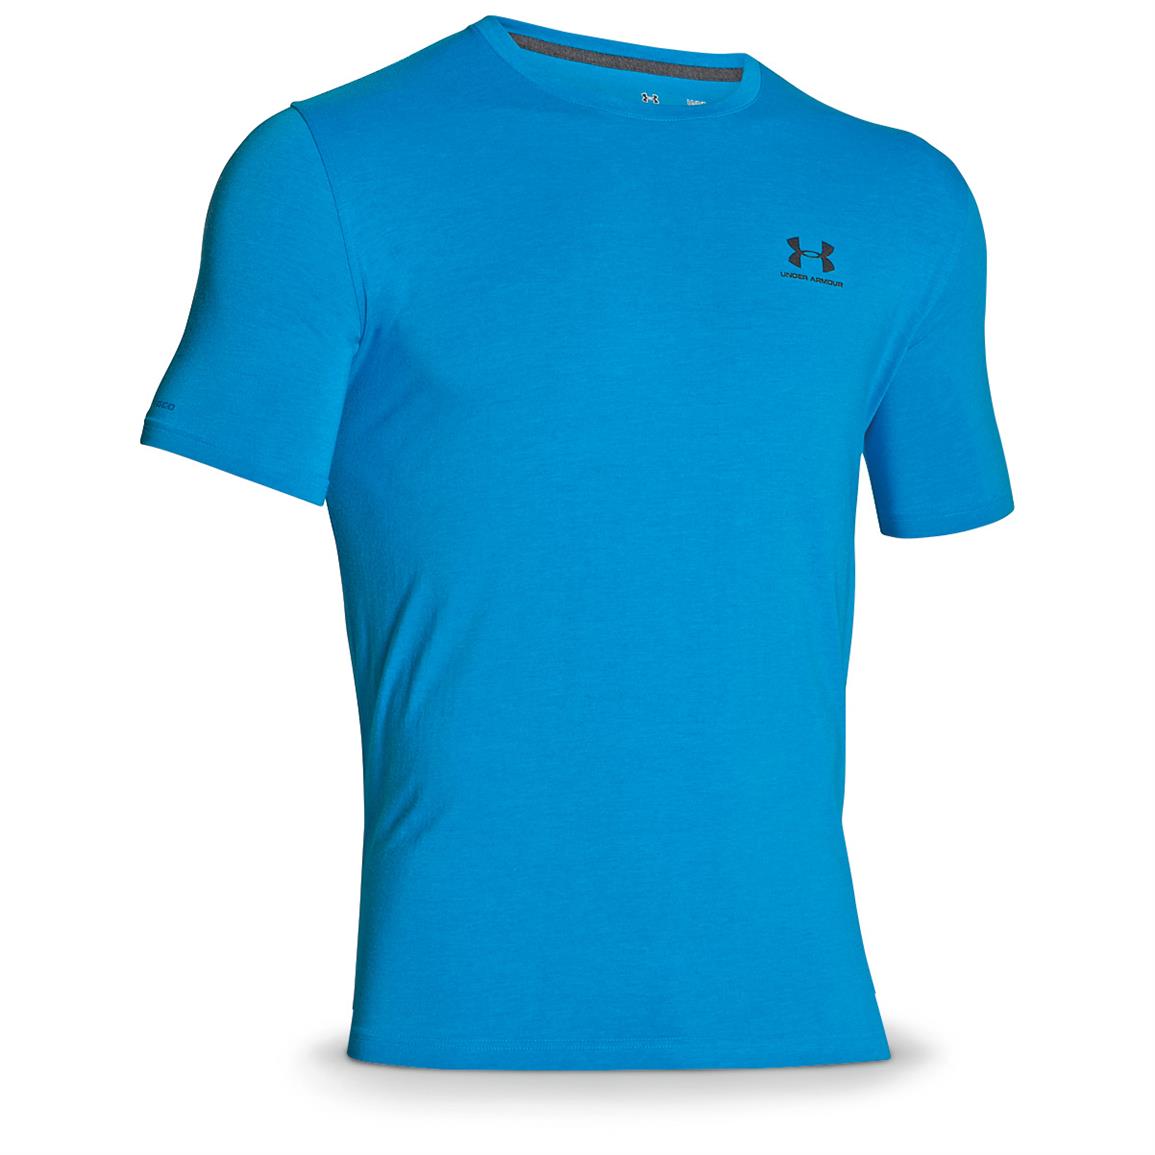 Under Armour Men's Charged Cotton Sportstyle T-Shirt - 655753, T-Shirts at Sportsman's Guide